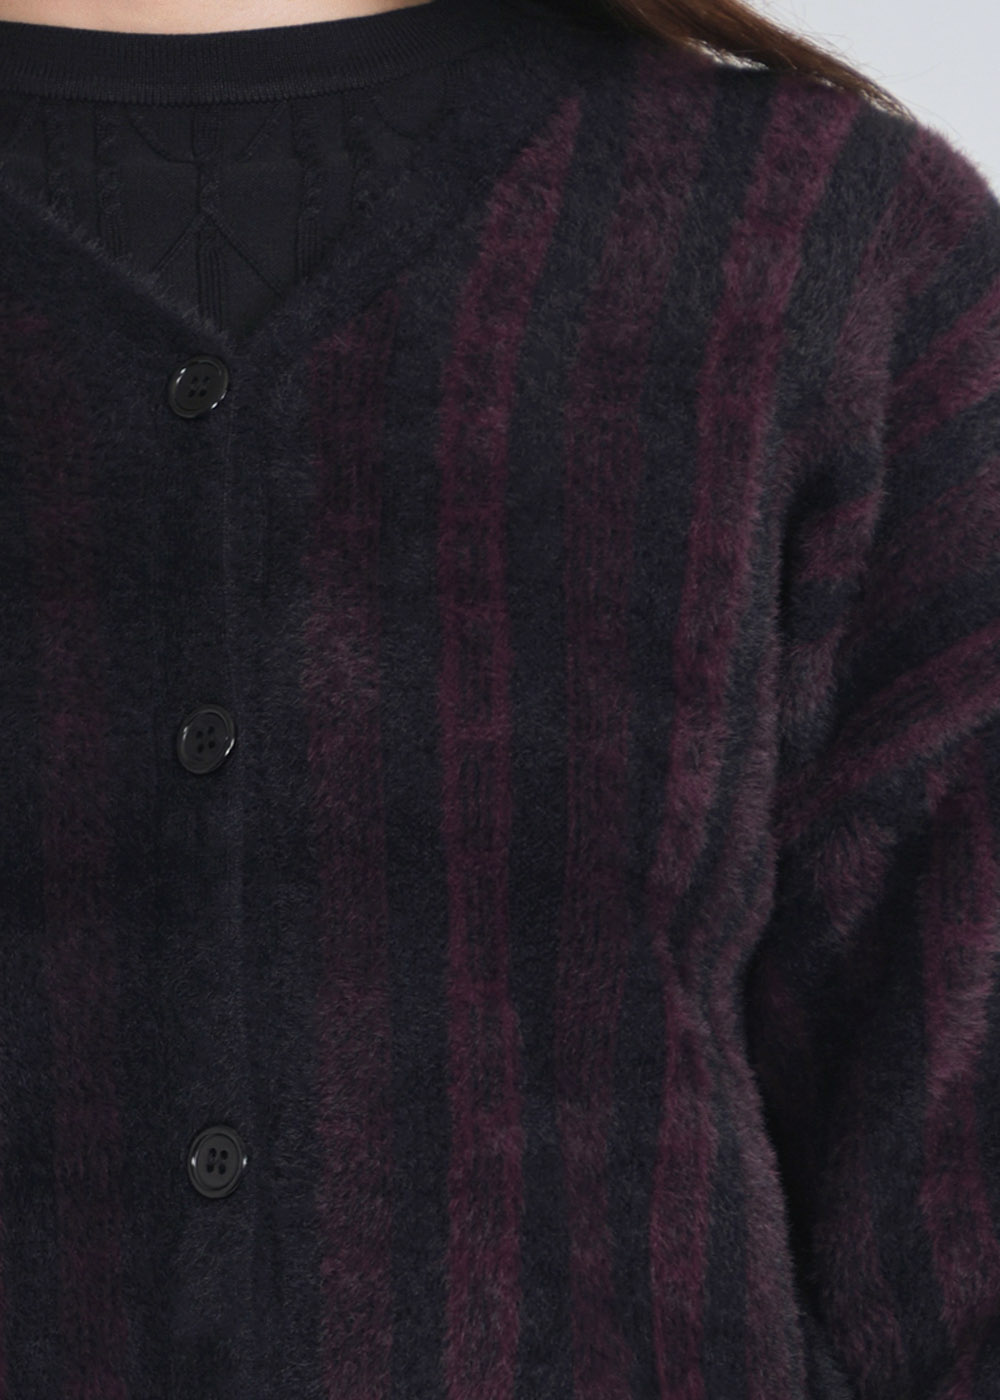 Warmth in Stripes: Burgundy & Black Cardigan in Furry Texture